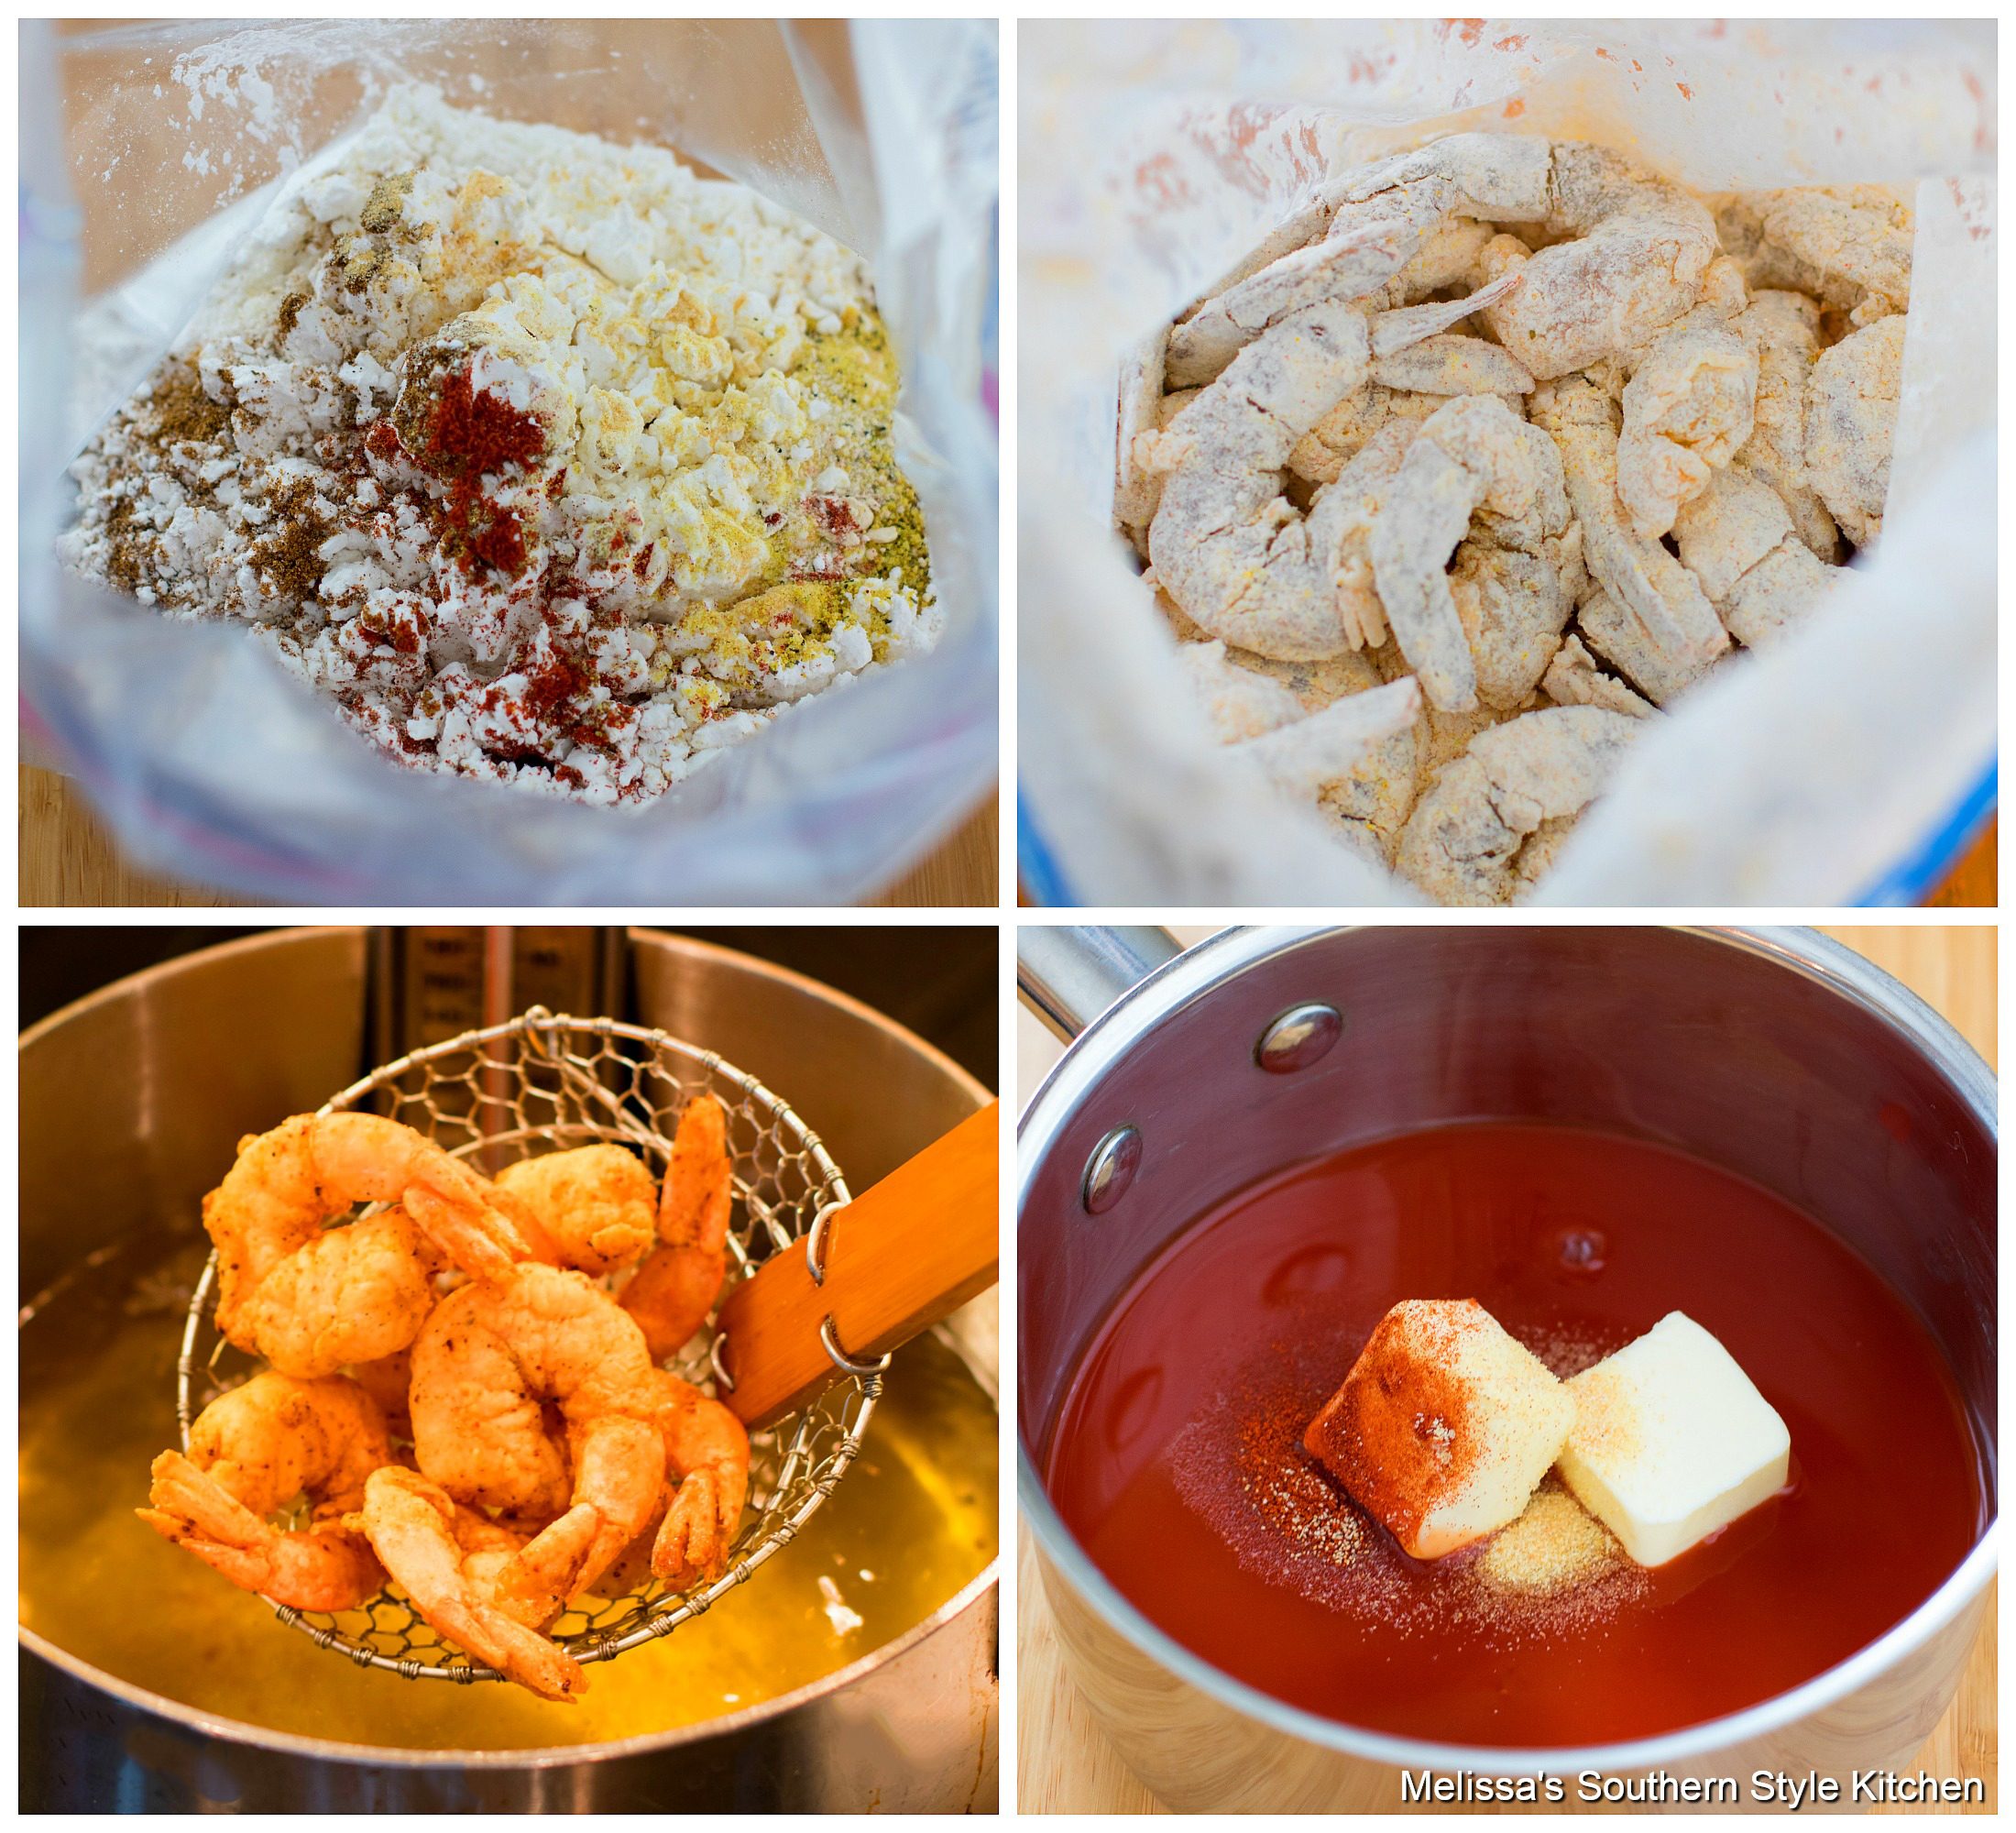 Step-by-step preparation images and ingredients for buffalo shrimp